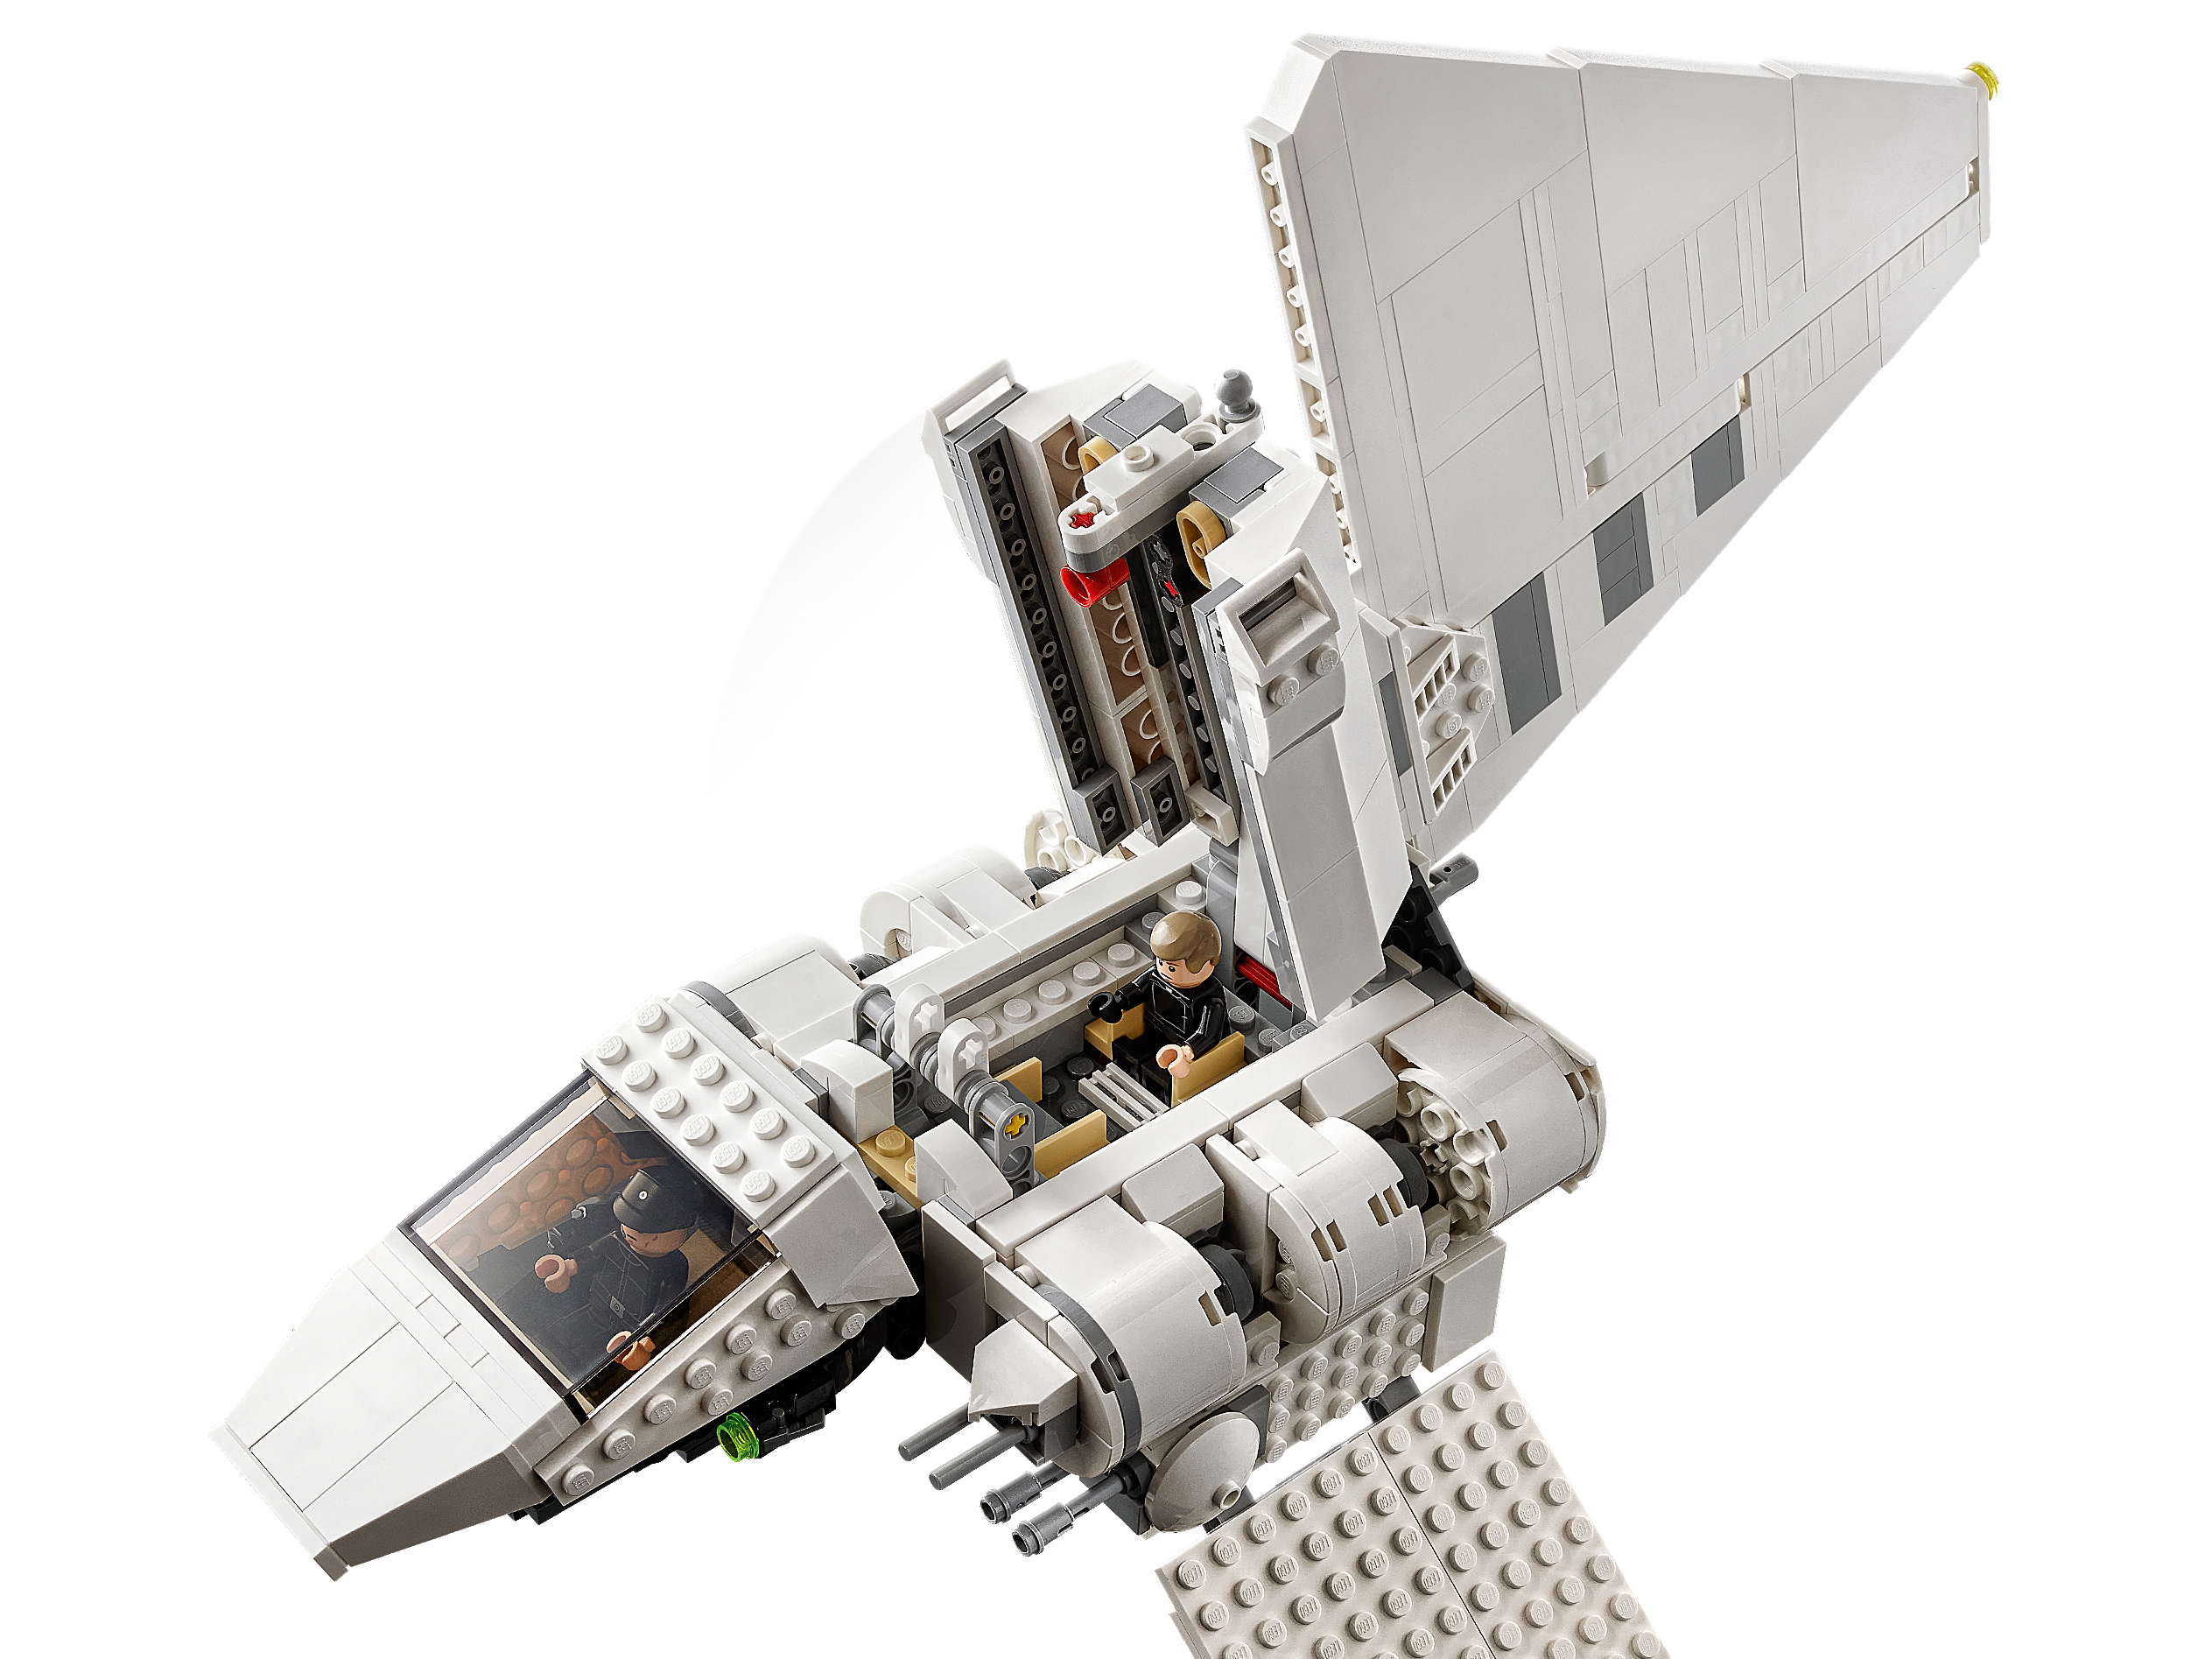 New 2021 LEGO Star Wars Imperial Shuttle 75302 Building Kit; Awesome Building Toy for Kids Featuring Luke Skywalker and Darth Vader; Great Gift Idea for Star Wars Fans Aged 9 and Up 660 Pieces 